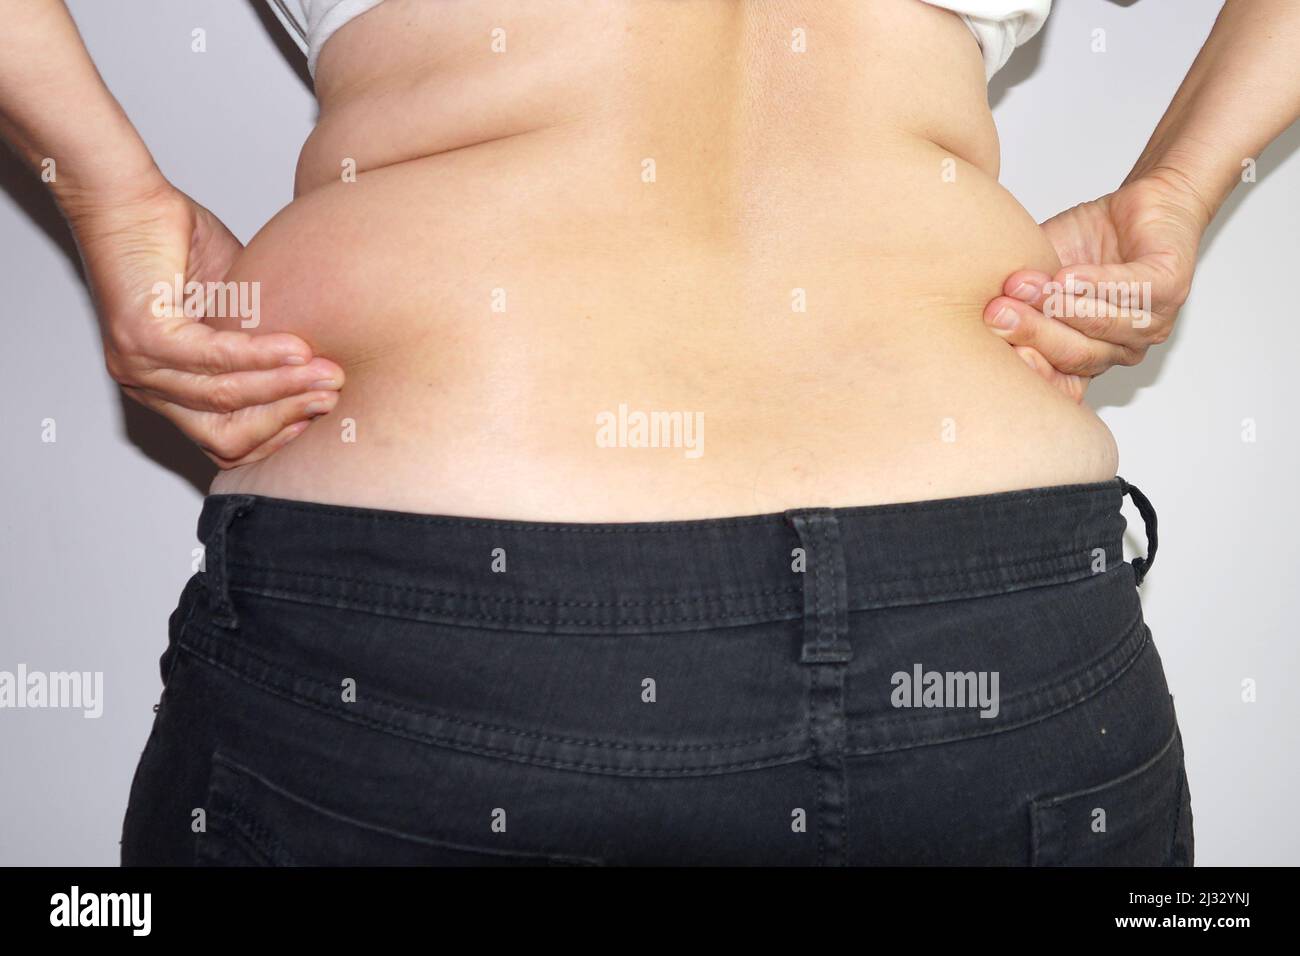 woman in jeans holds fat folds at her waist with her hands, rear view. Stock Photo